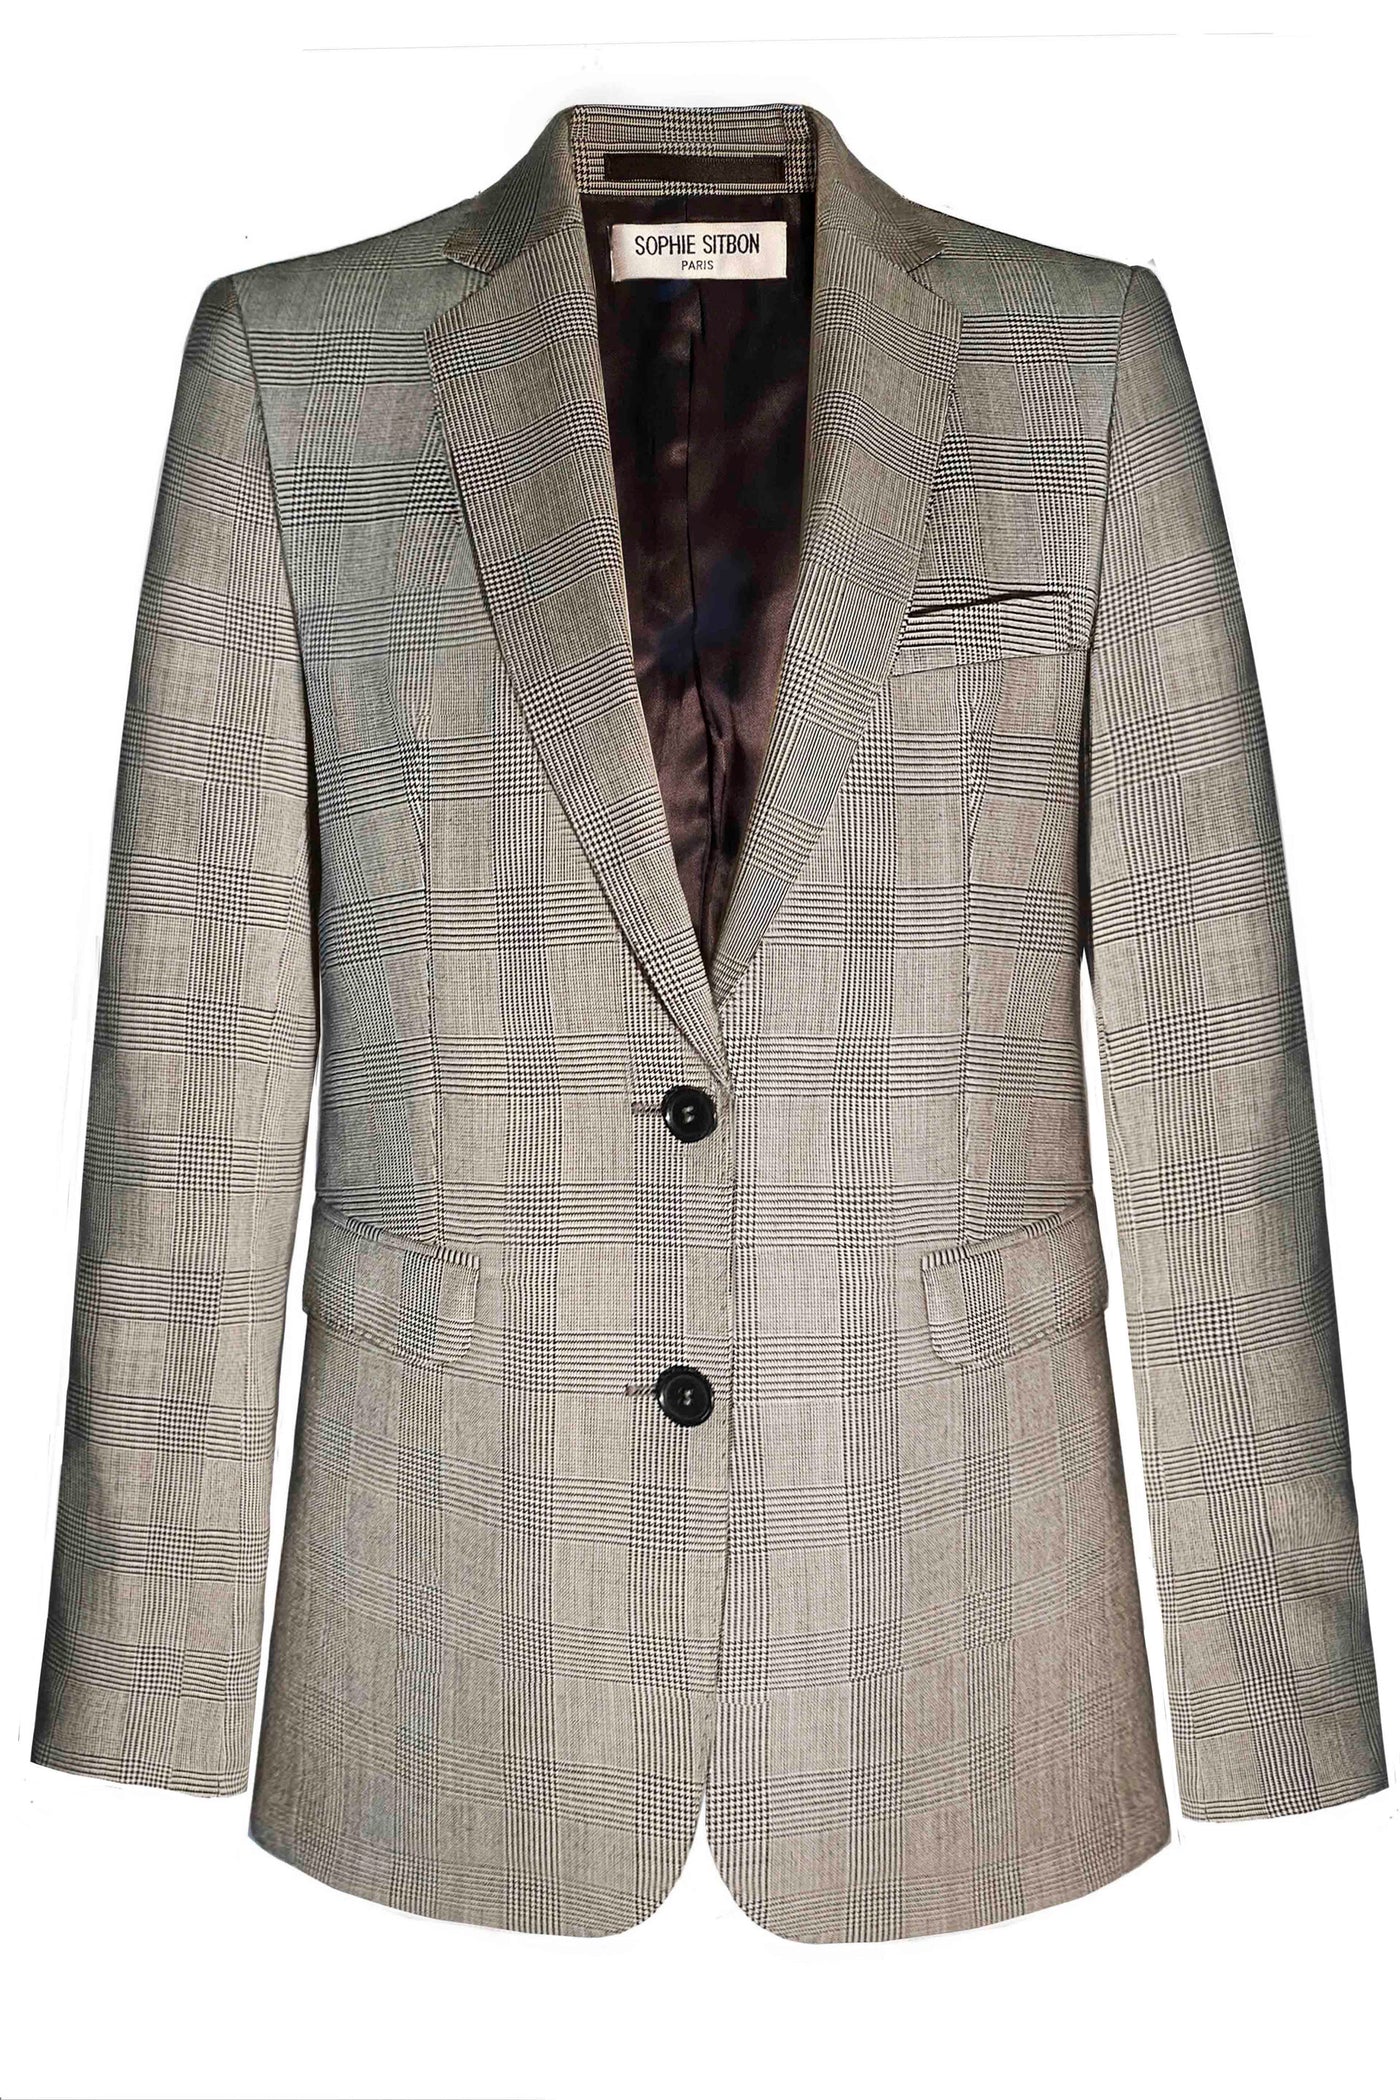 SINGLE-BREASTED JACKET IN PRINCE OF WALES WOOL 